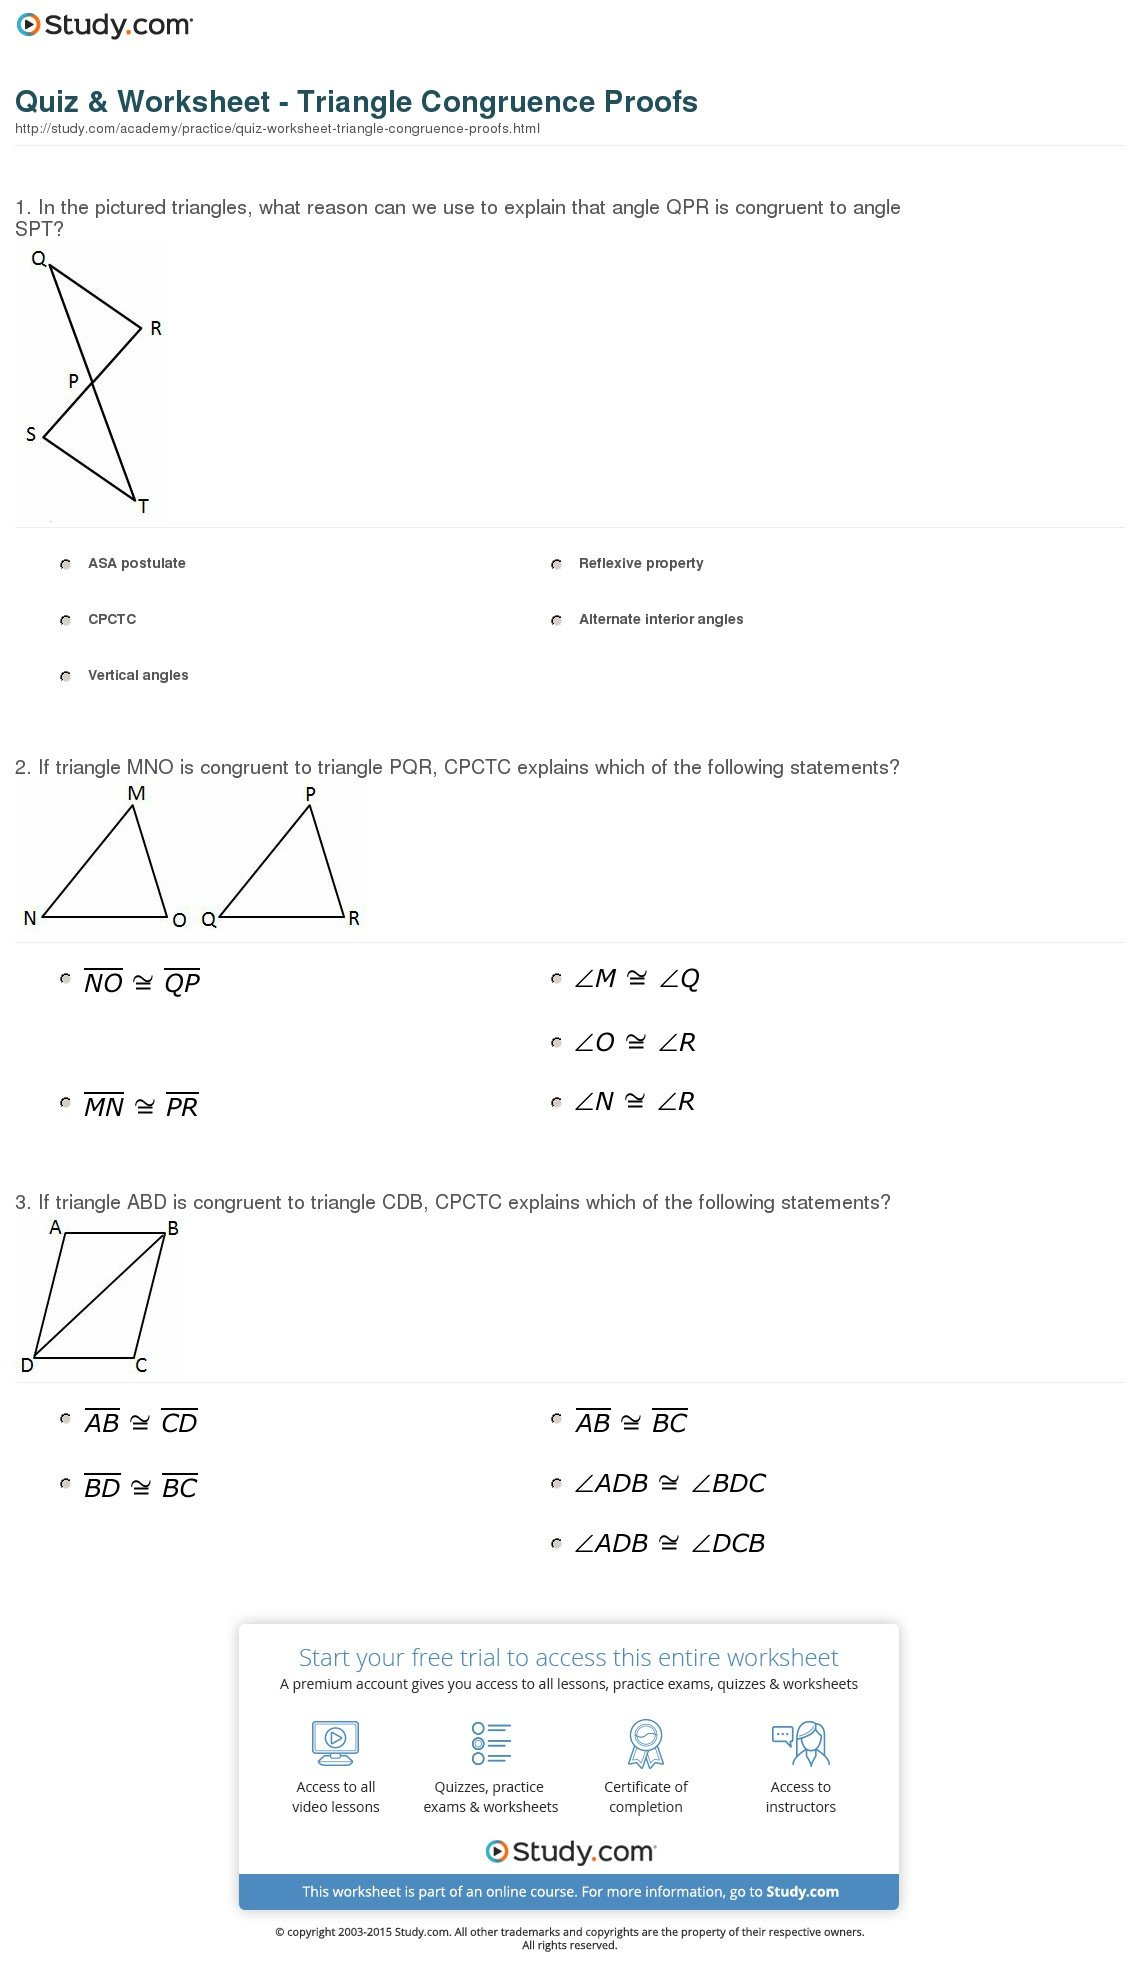 Quiz  Worksheet  Triangle Congruence Proofs  Study With Triangle Congruence Proofs Worksheet Answers